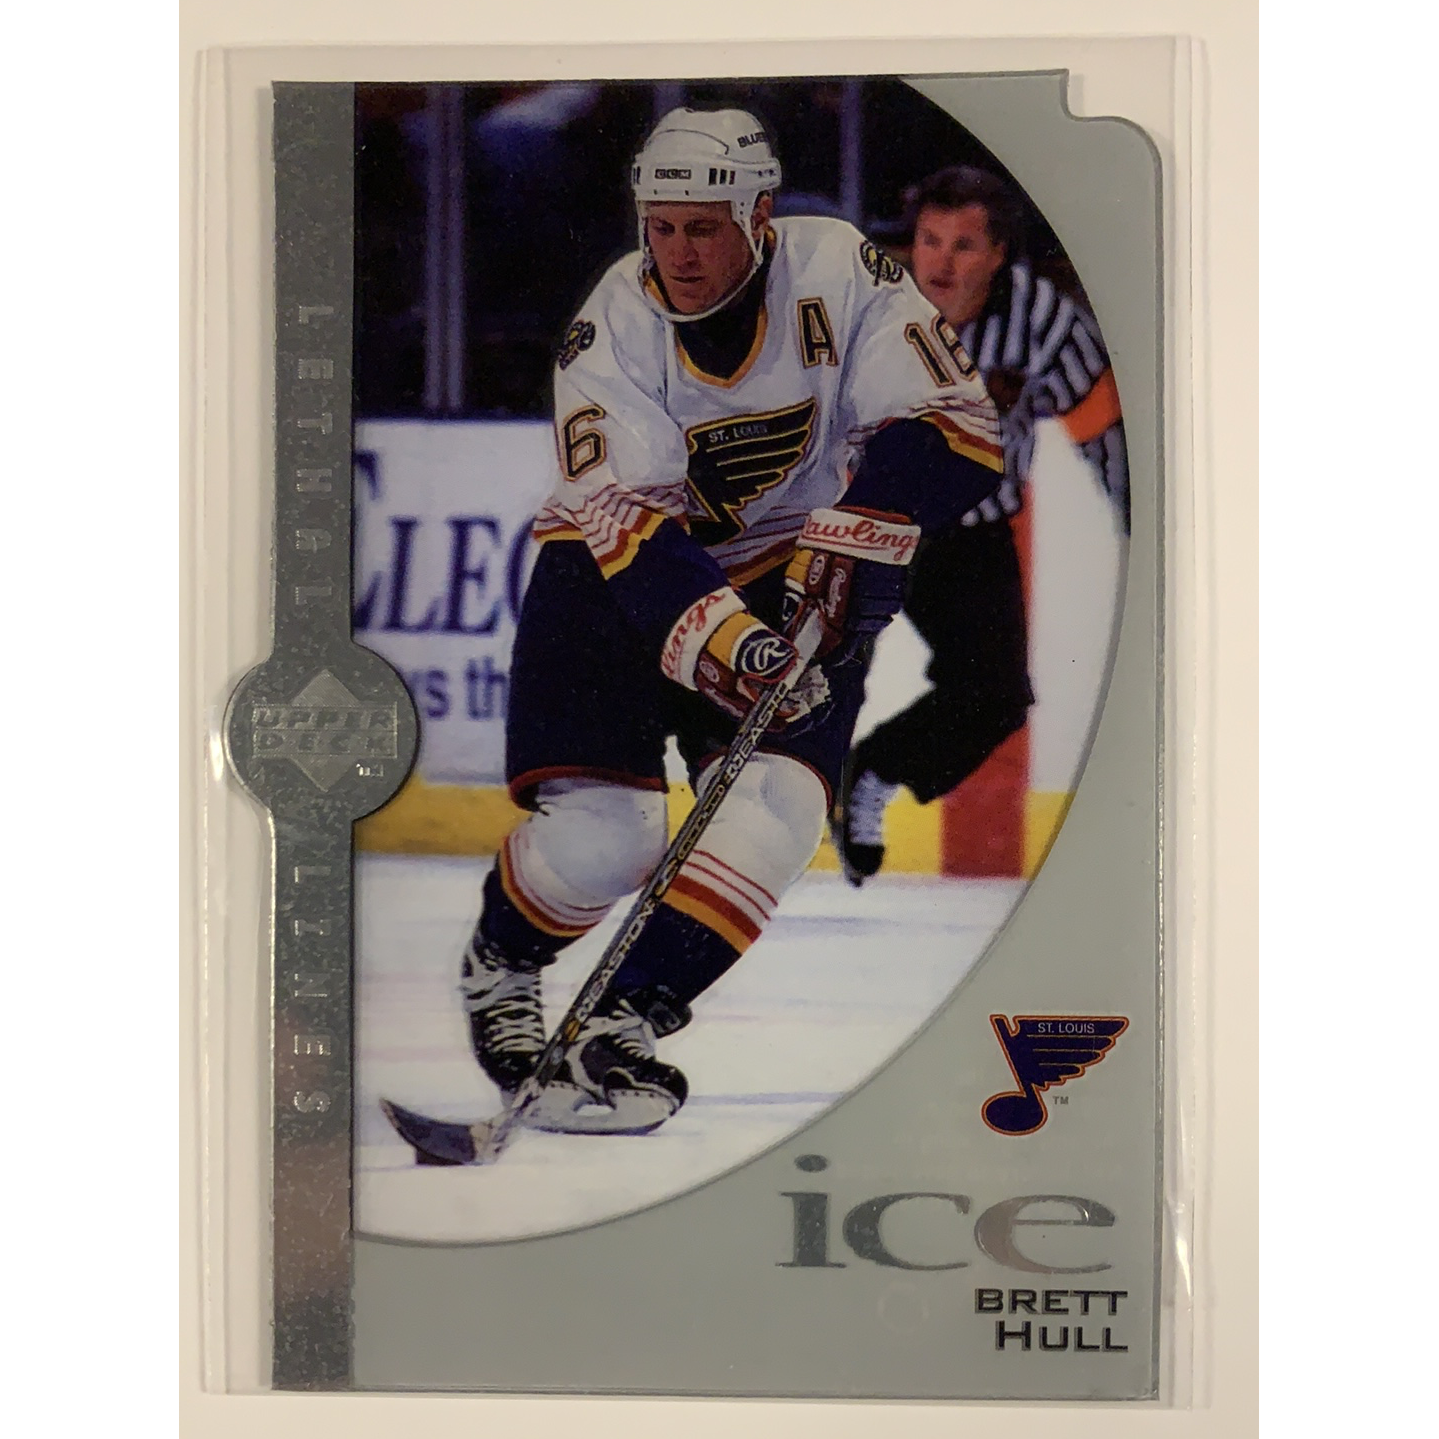  1998-99 Upper Deck Brett Hull Lethal Lines  Local Legends Cards & Collectibles